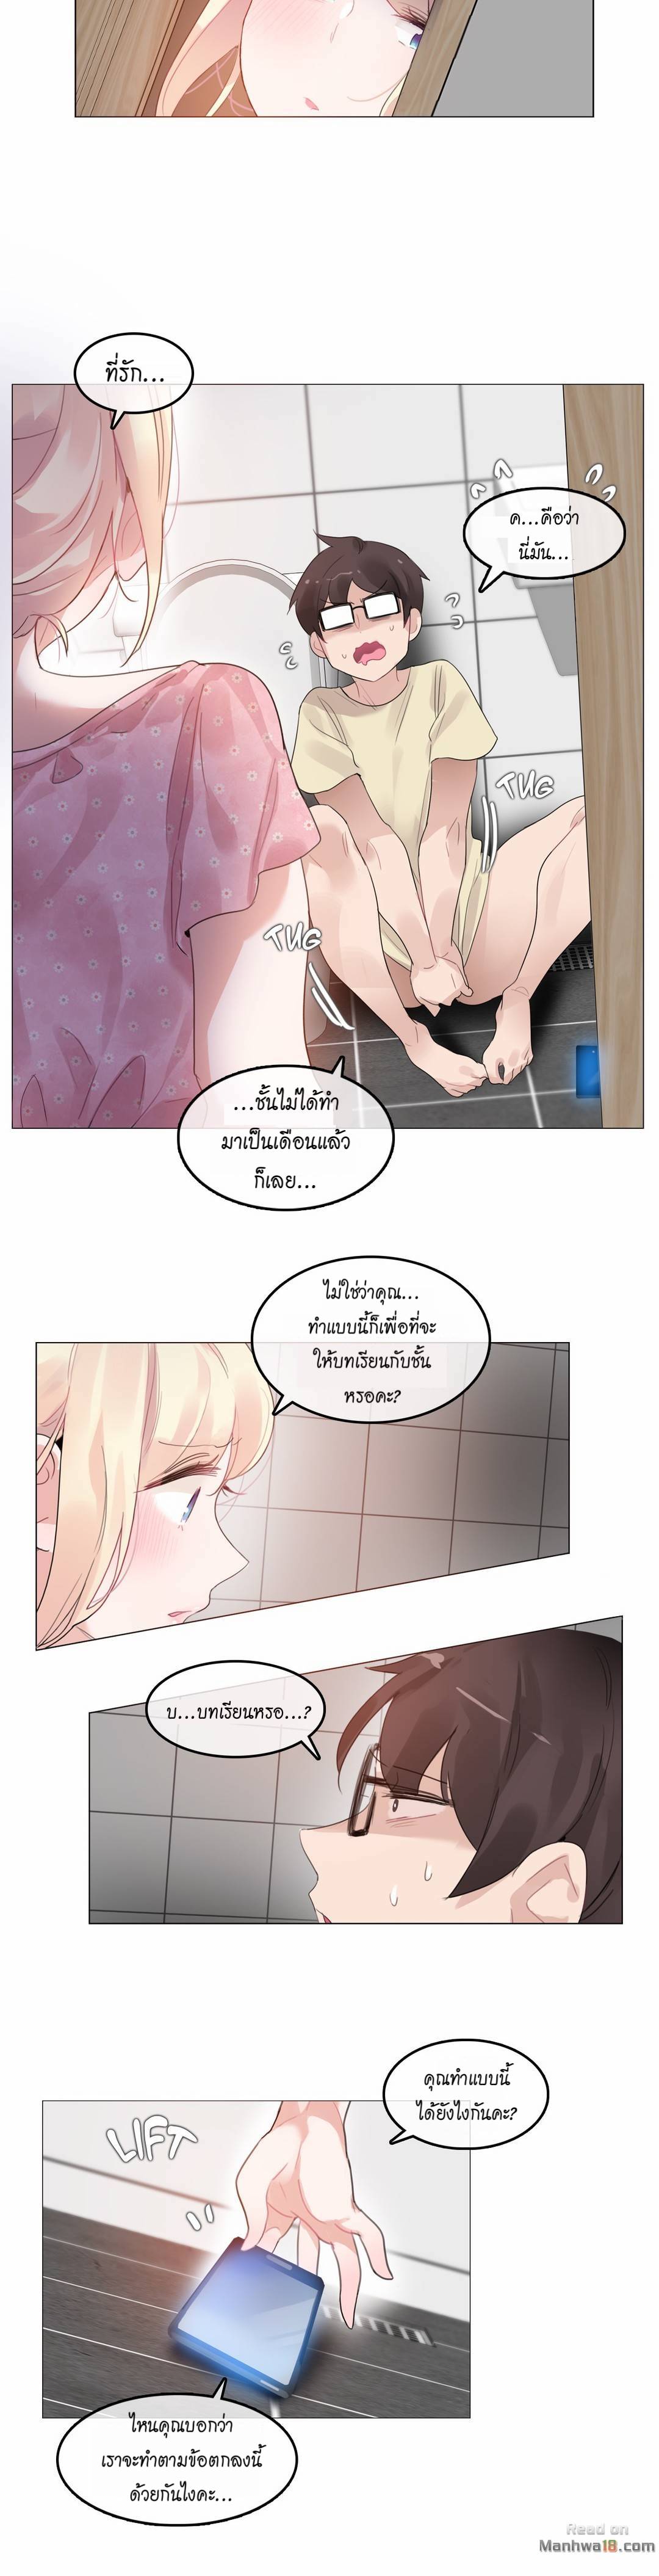 A Pervert’s Daily Life 68 18